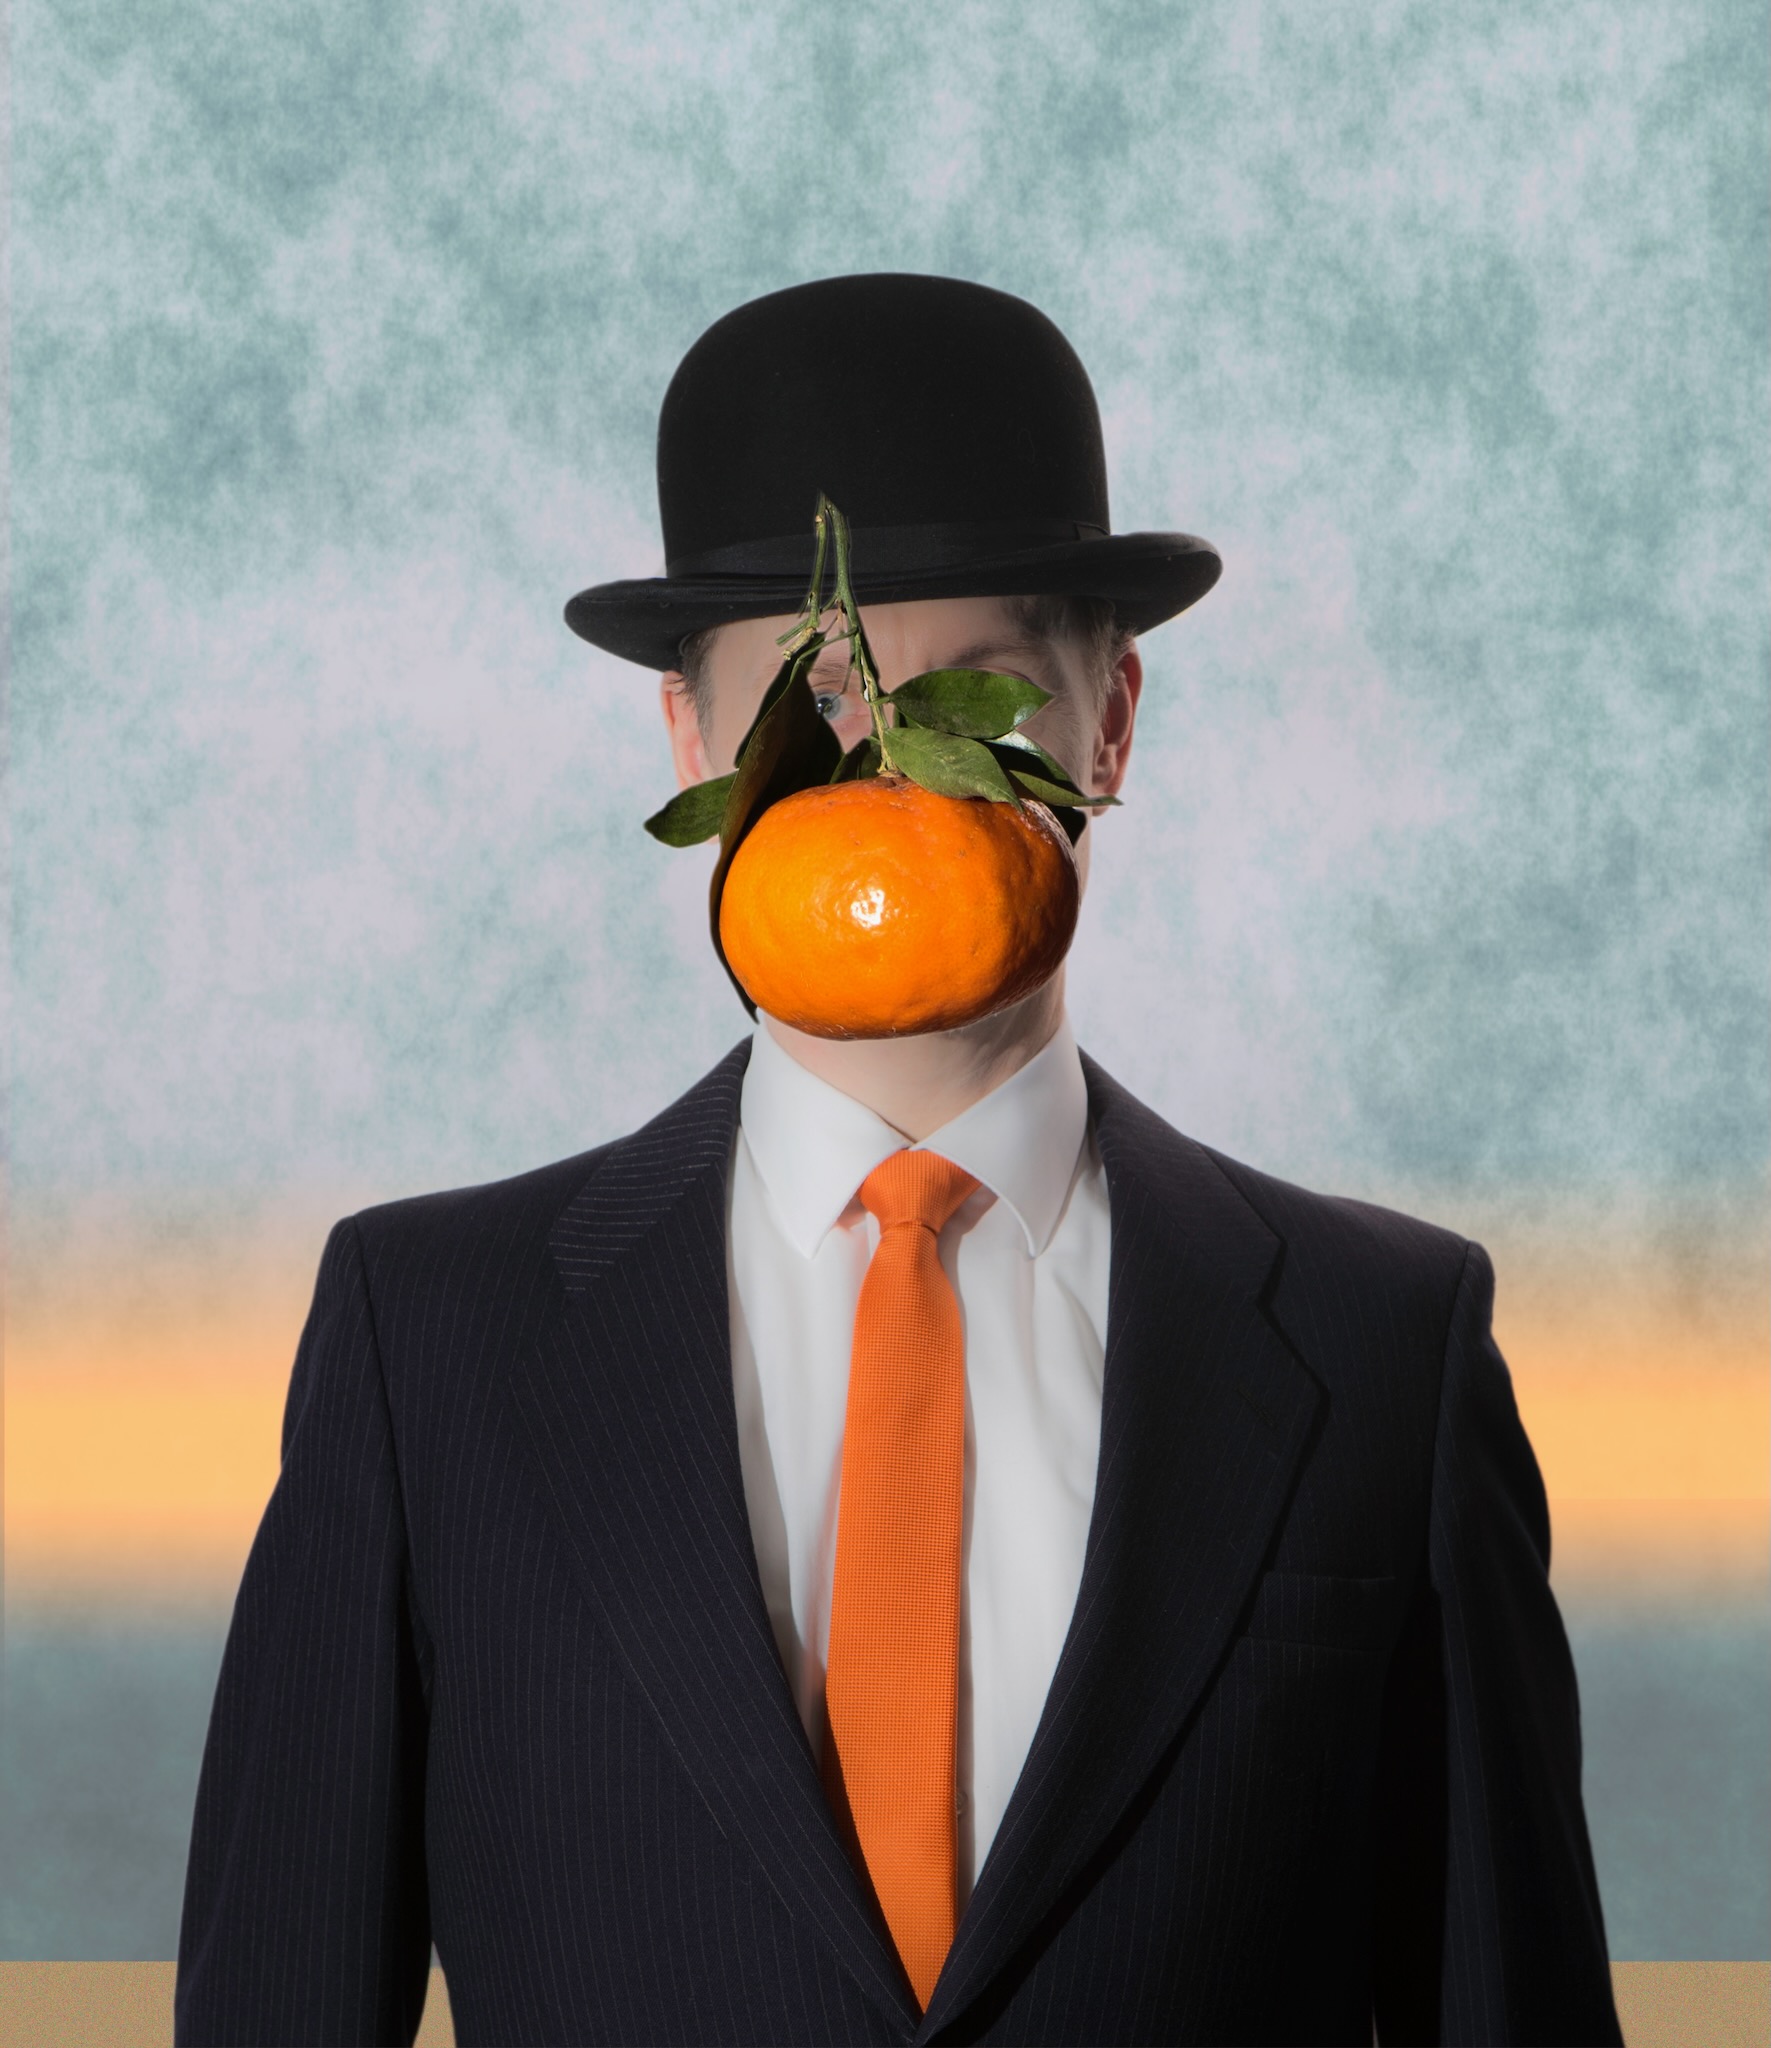 Recreation of the famous Magritte painting "The Son of Man", with an orange instead of an apple.